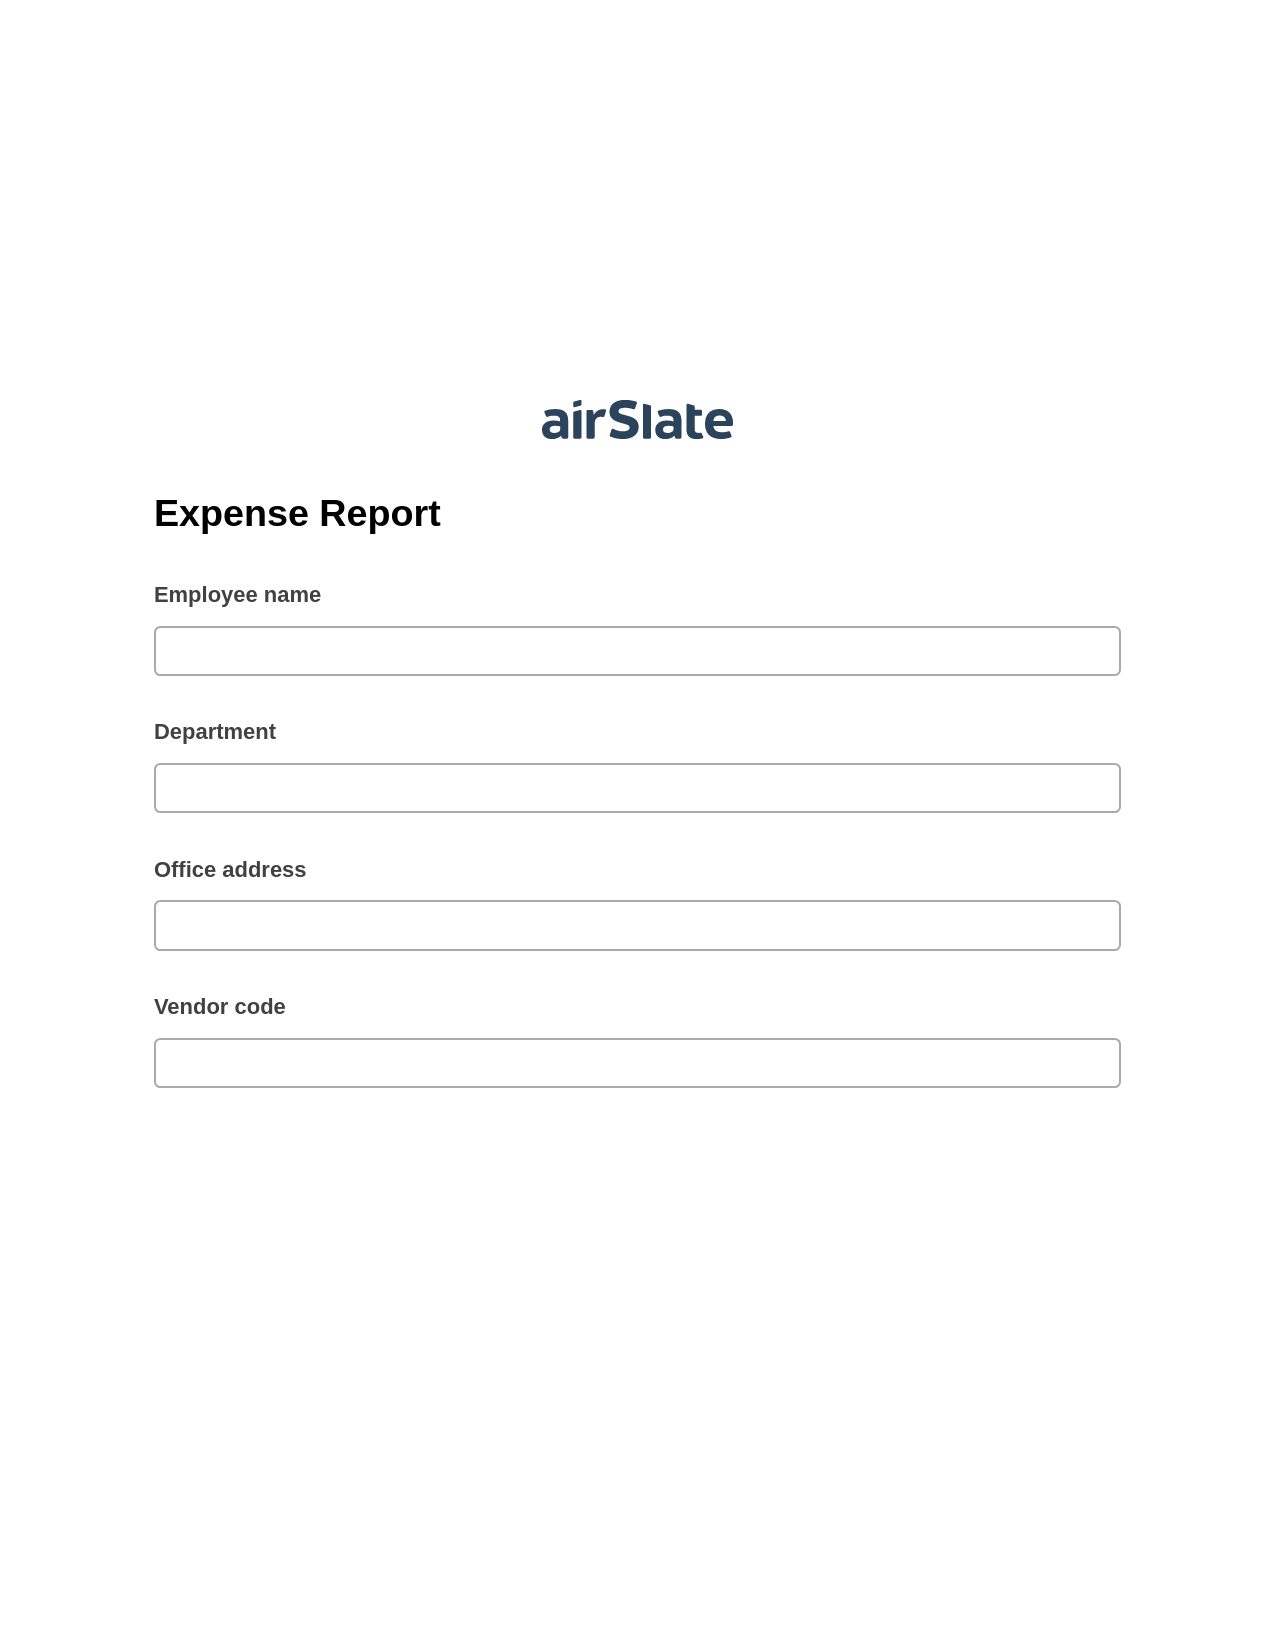 Multirole Expense Report Pre-fill from Excel Spreadsheet Bot, SendGrid send Campaign bot, Archive to SharePoint Folder Bot